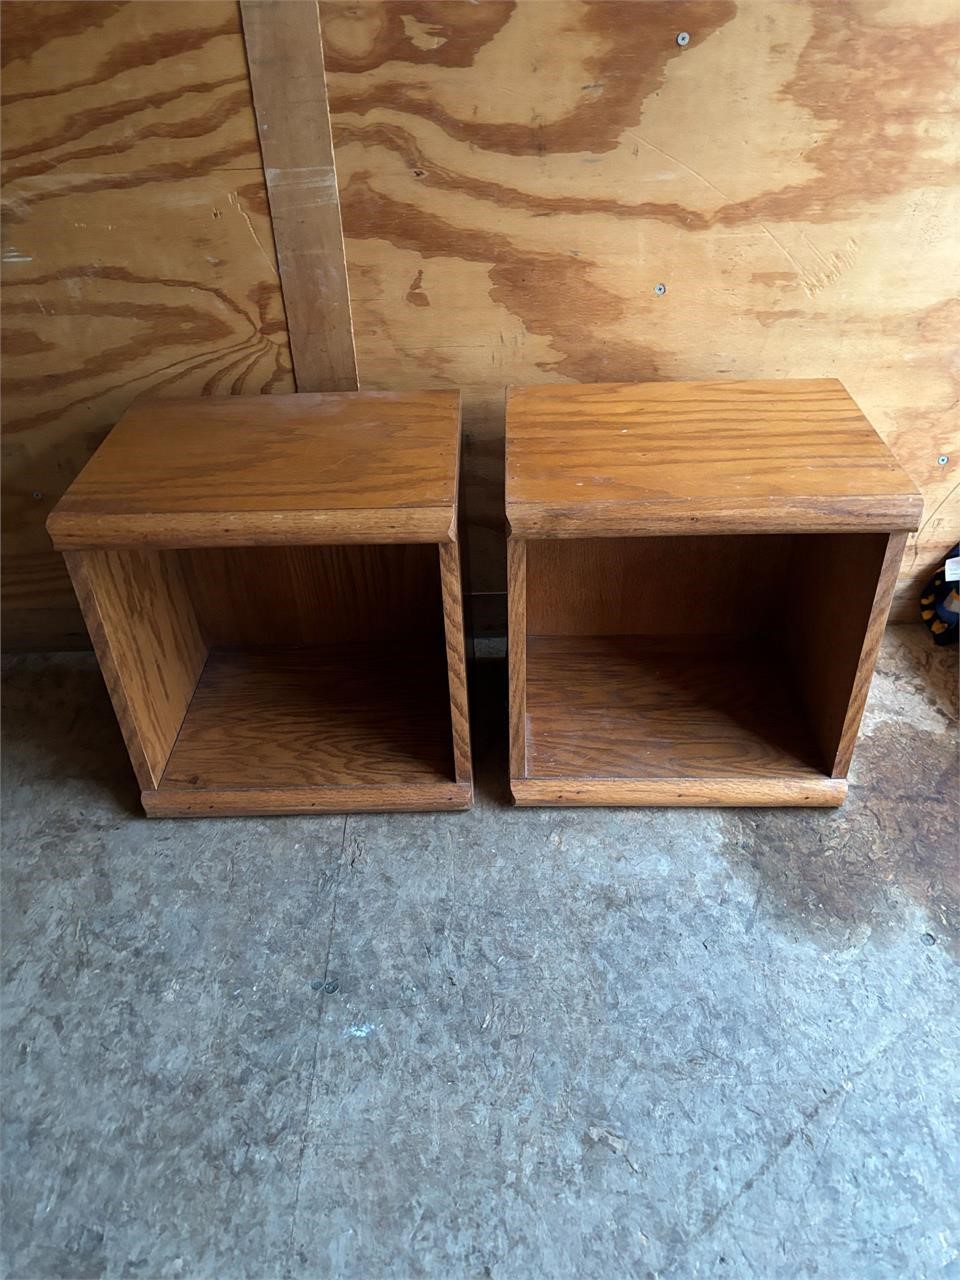 2 WOOD STANDS 15" X 12" X 16"